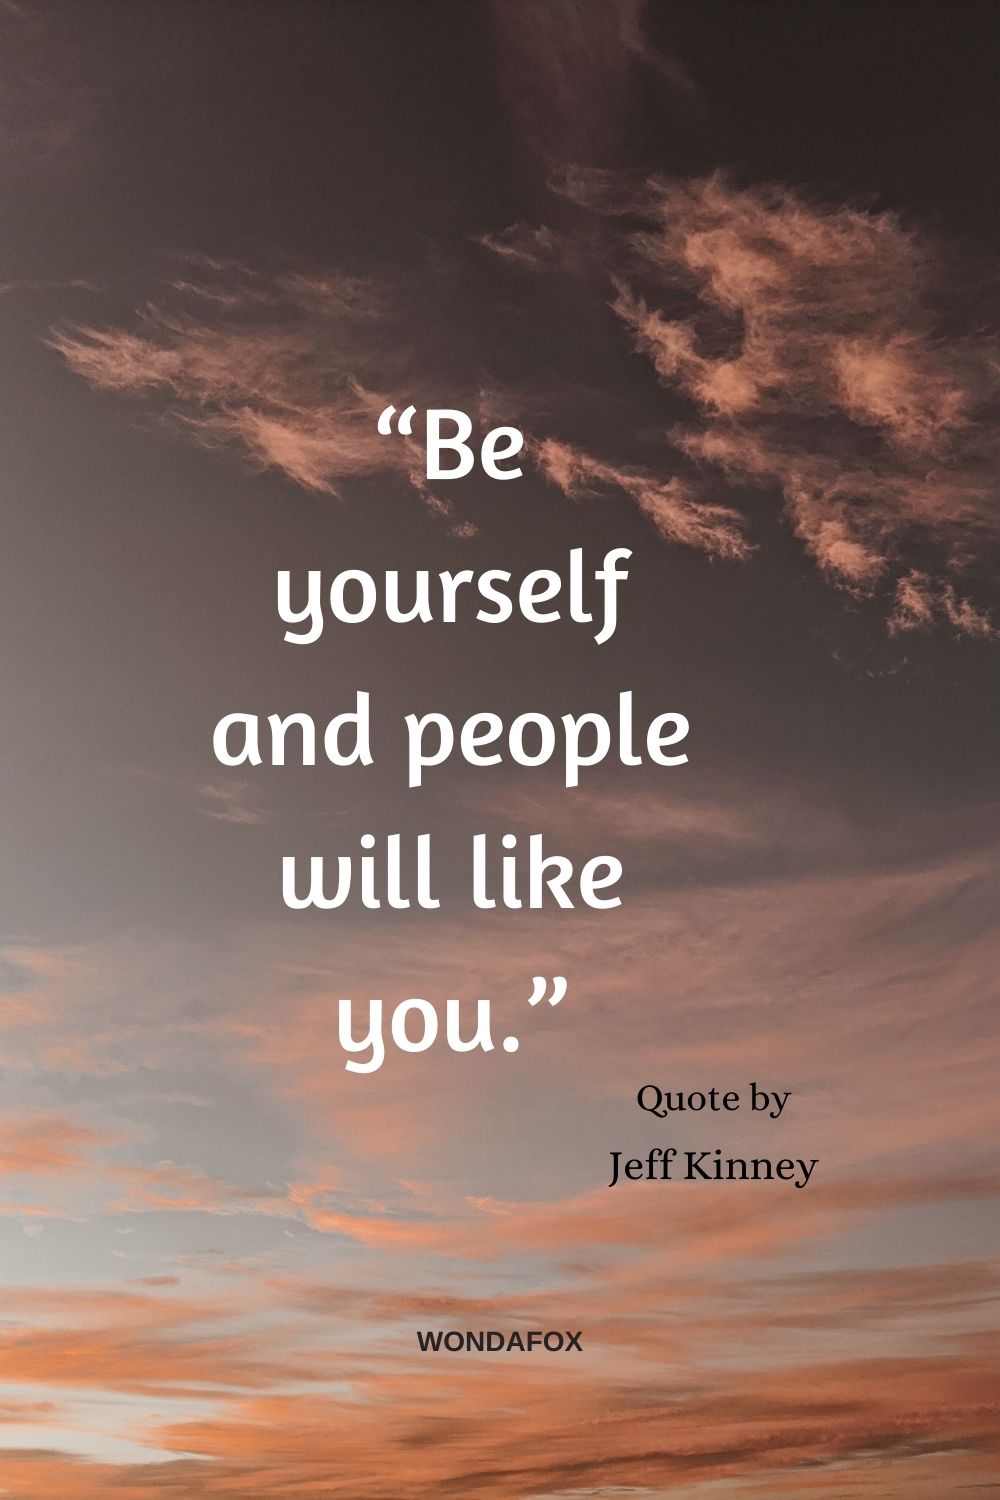 “Be yourself and people will like you.”
Jeff Kinney